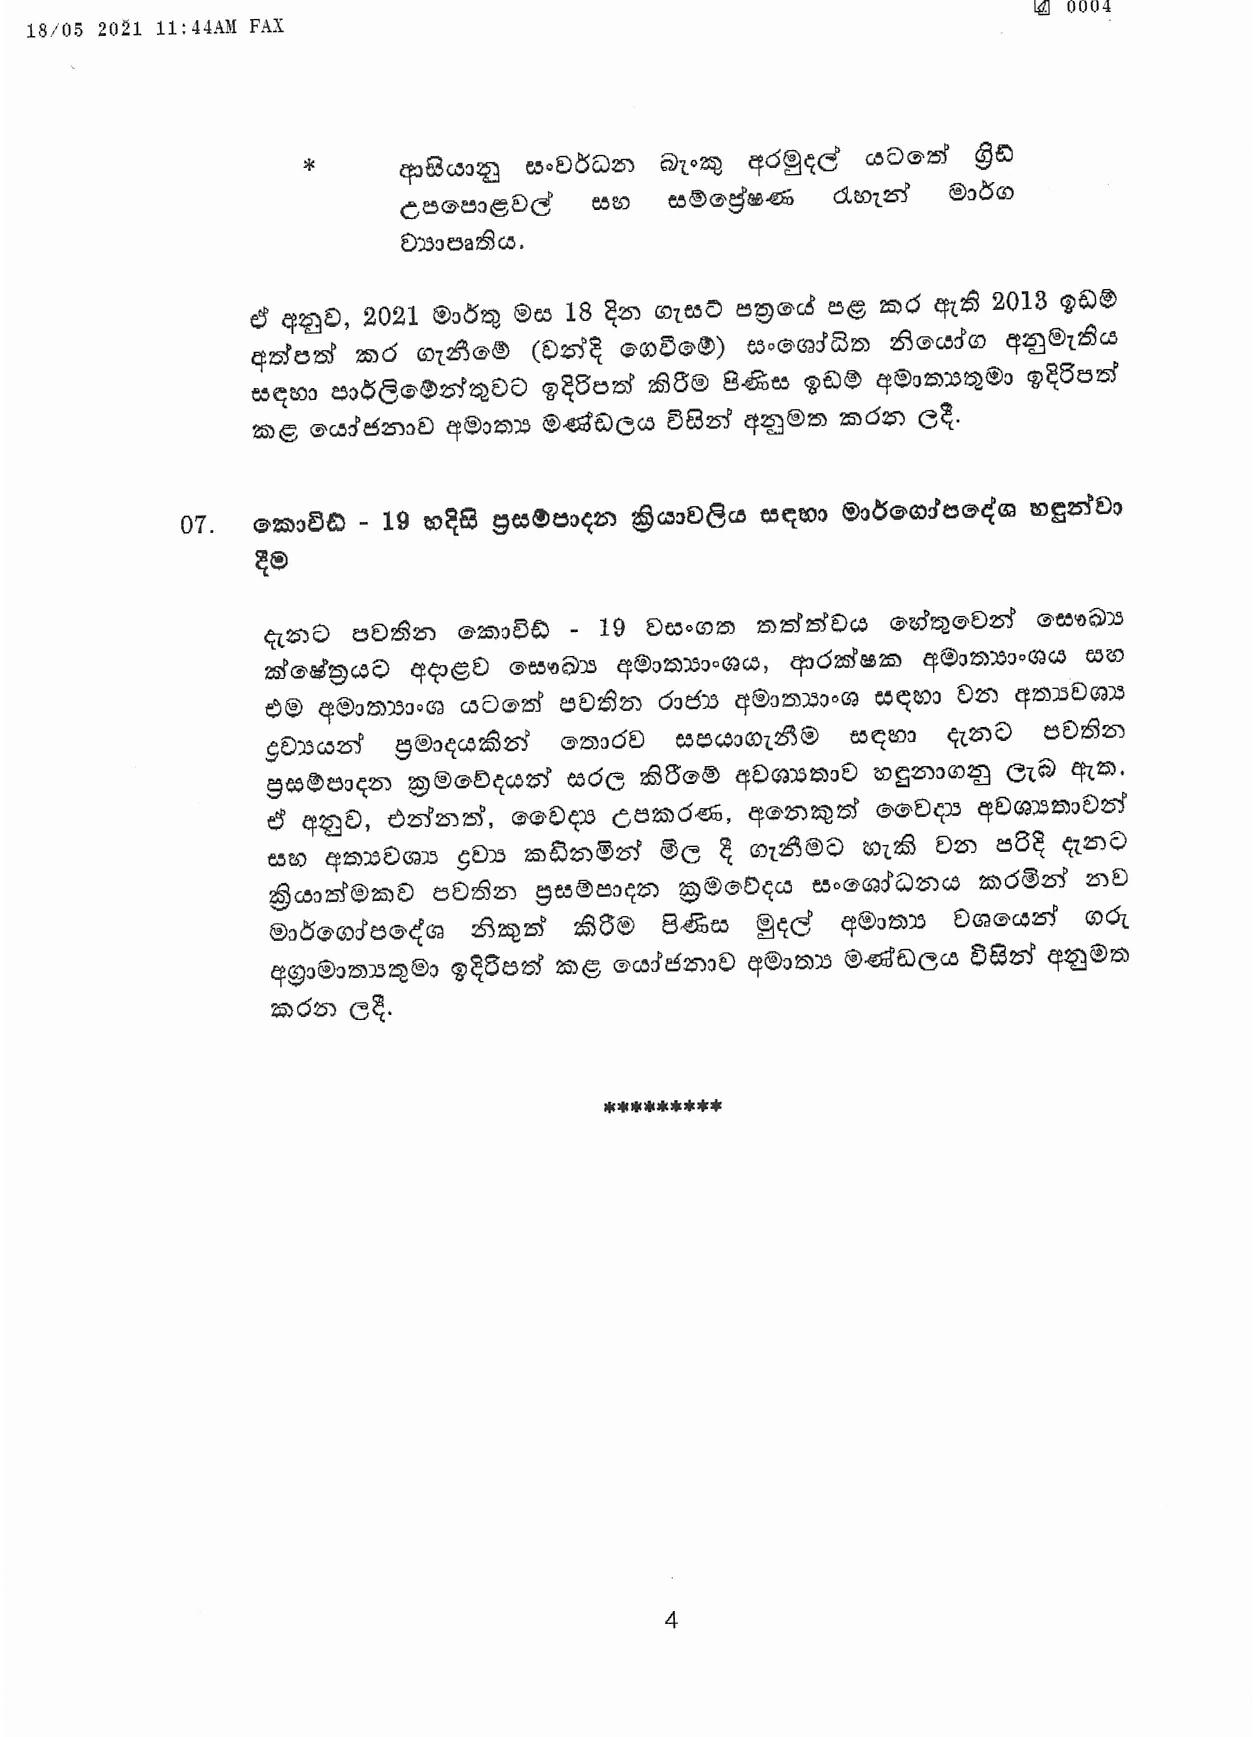 Cabinet Decision on 17.05.2021 page 001